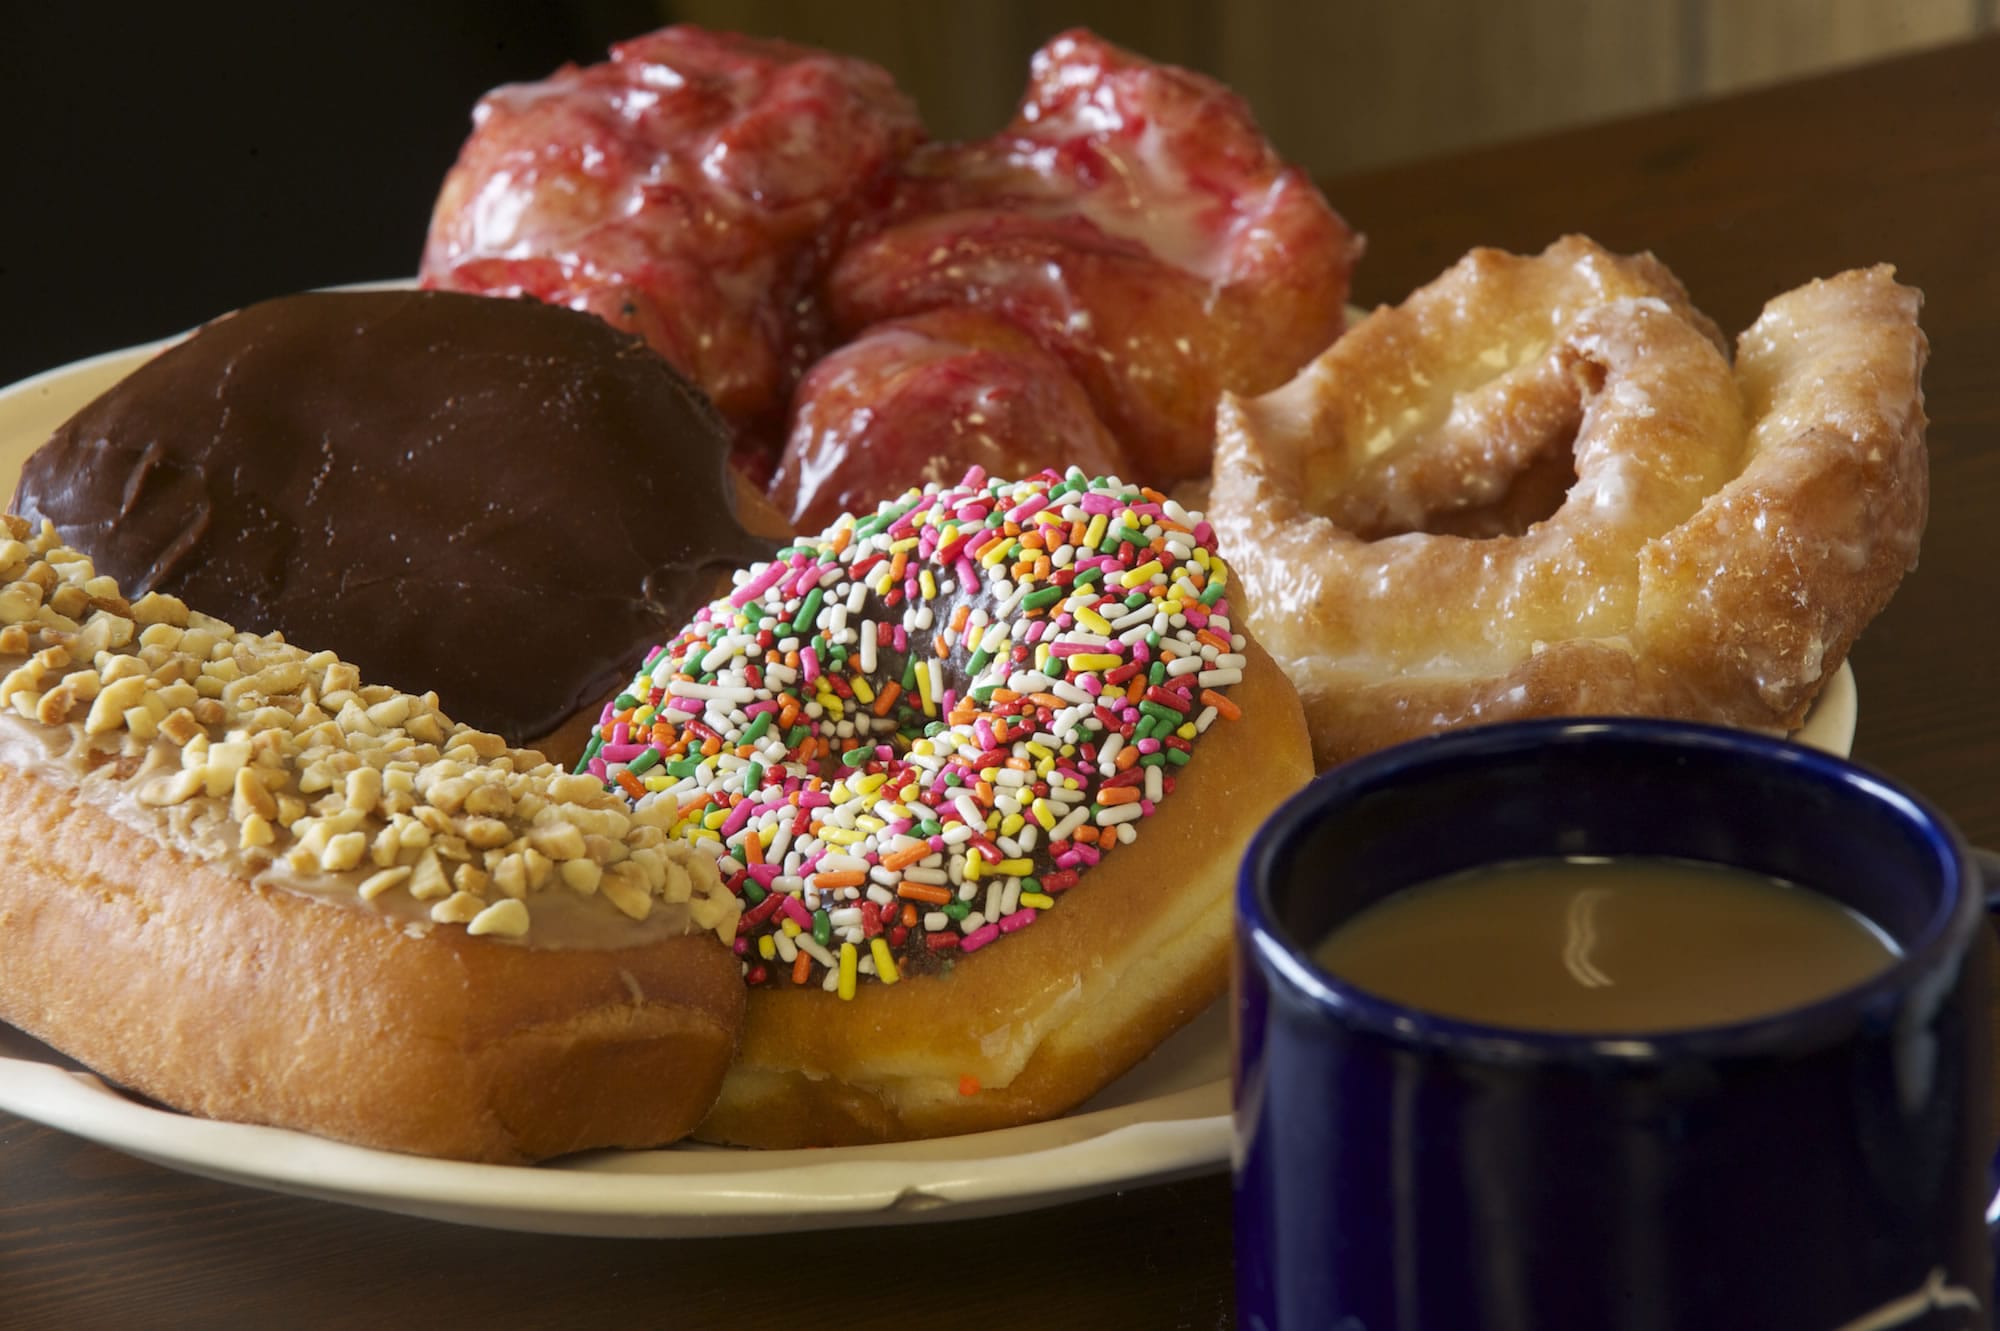 A delicious Friday assortment of doughnuts at the Donut Nook.